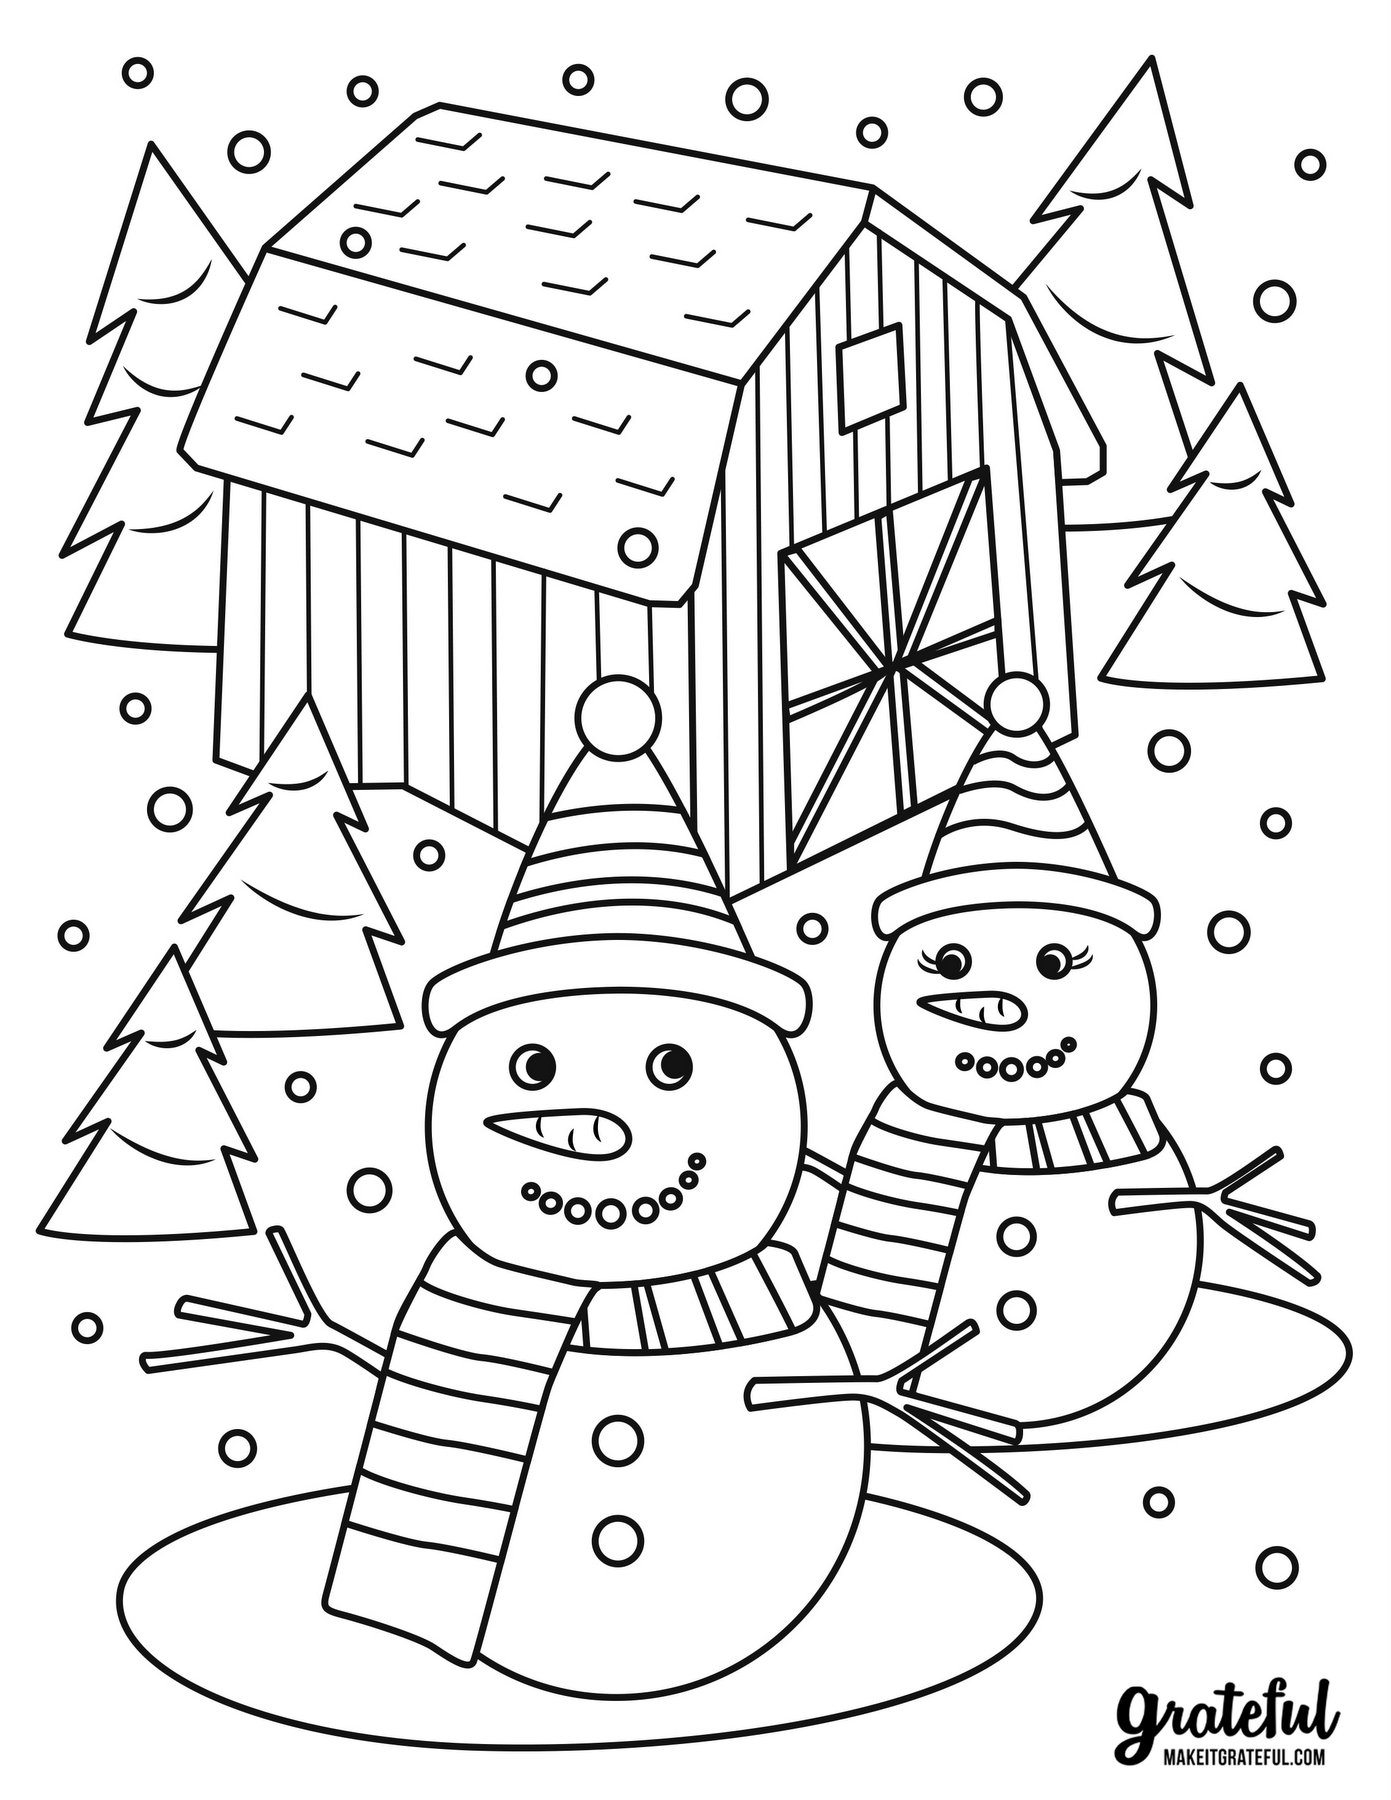 20 Christmas coloring pages your kids will love